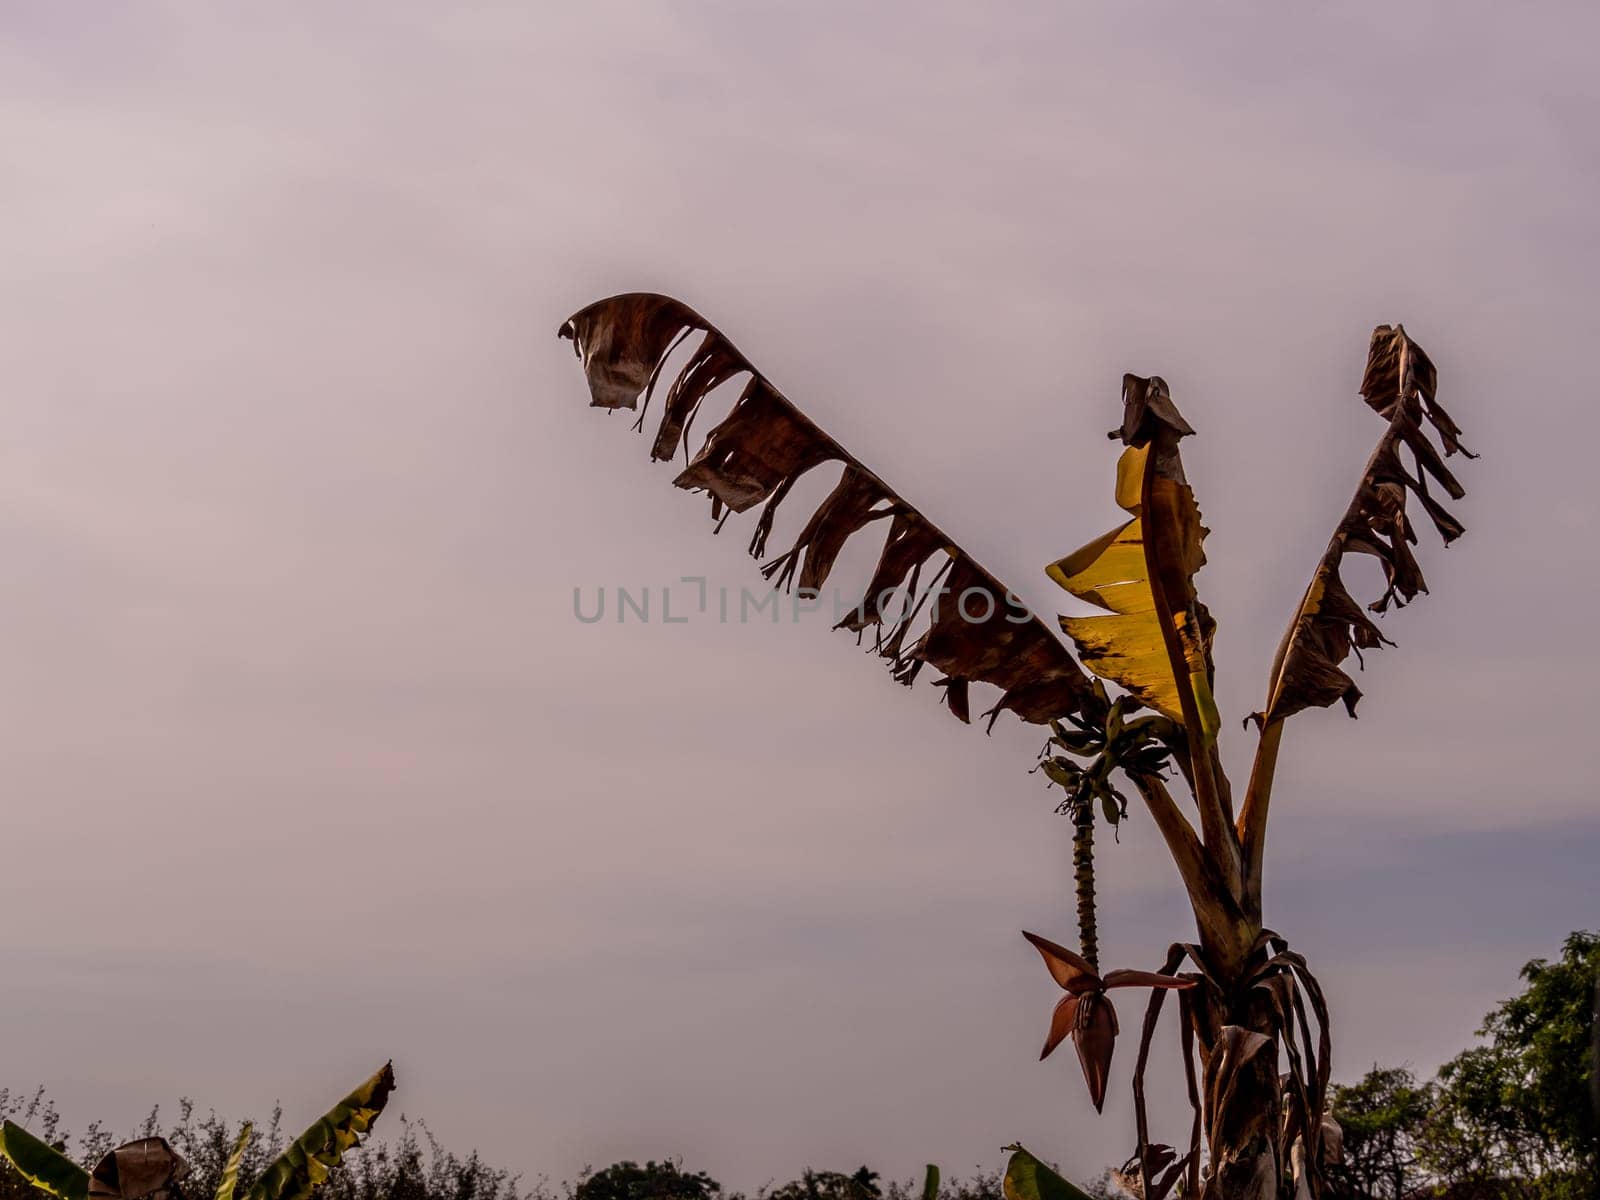 A wilt banana tree with tattered leaves in barren field by Satakorn